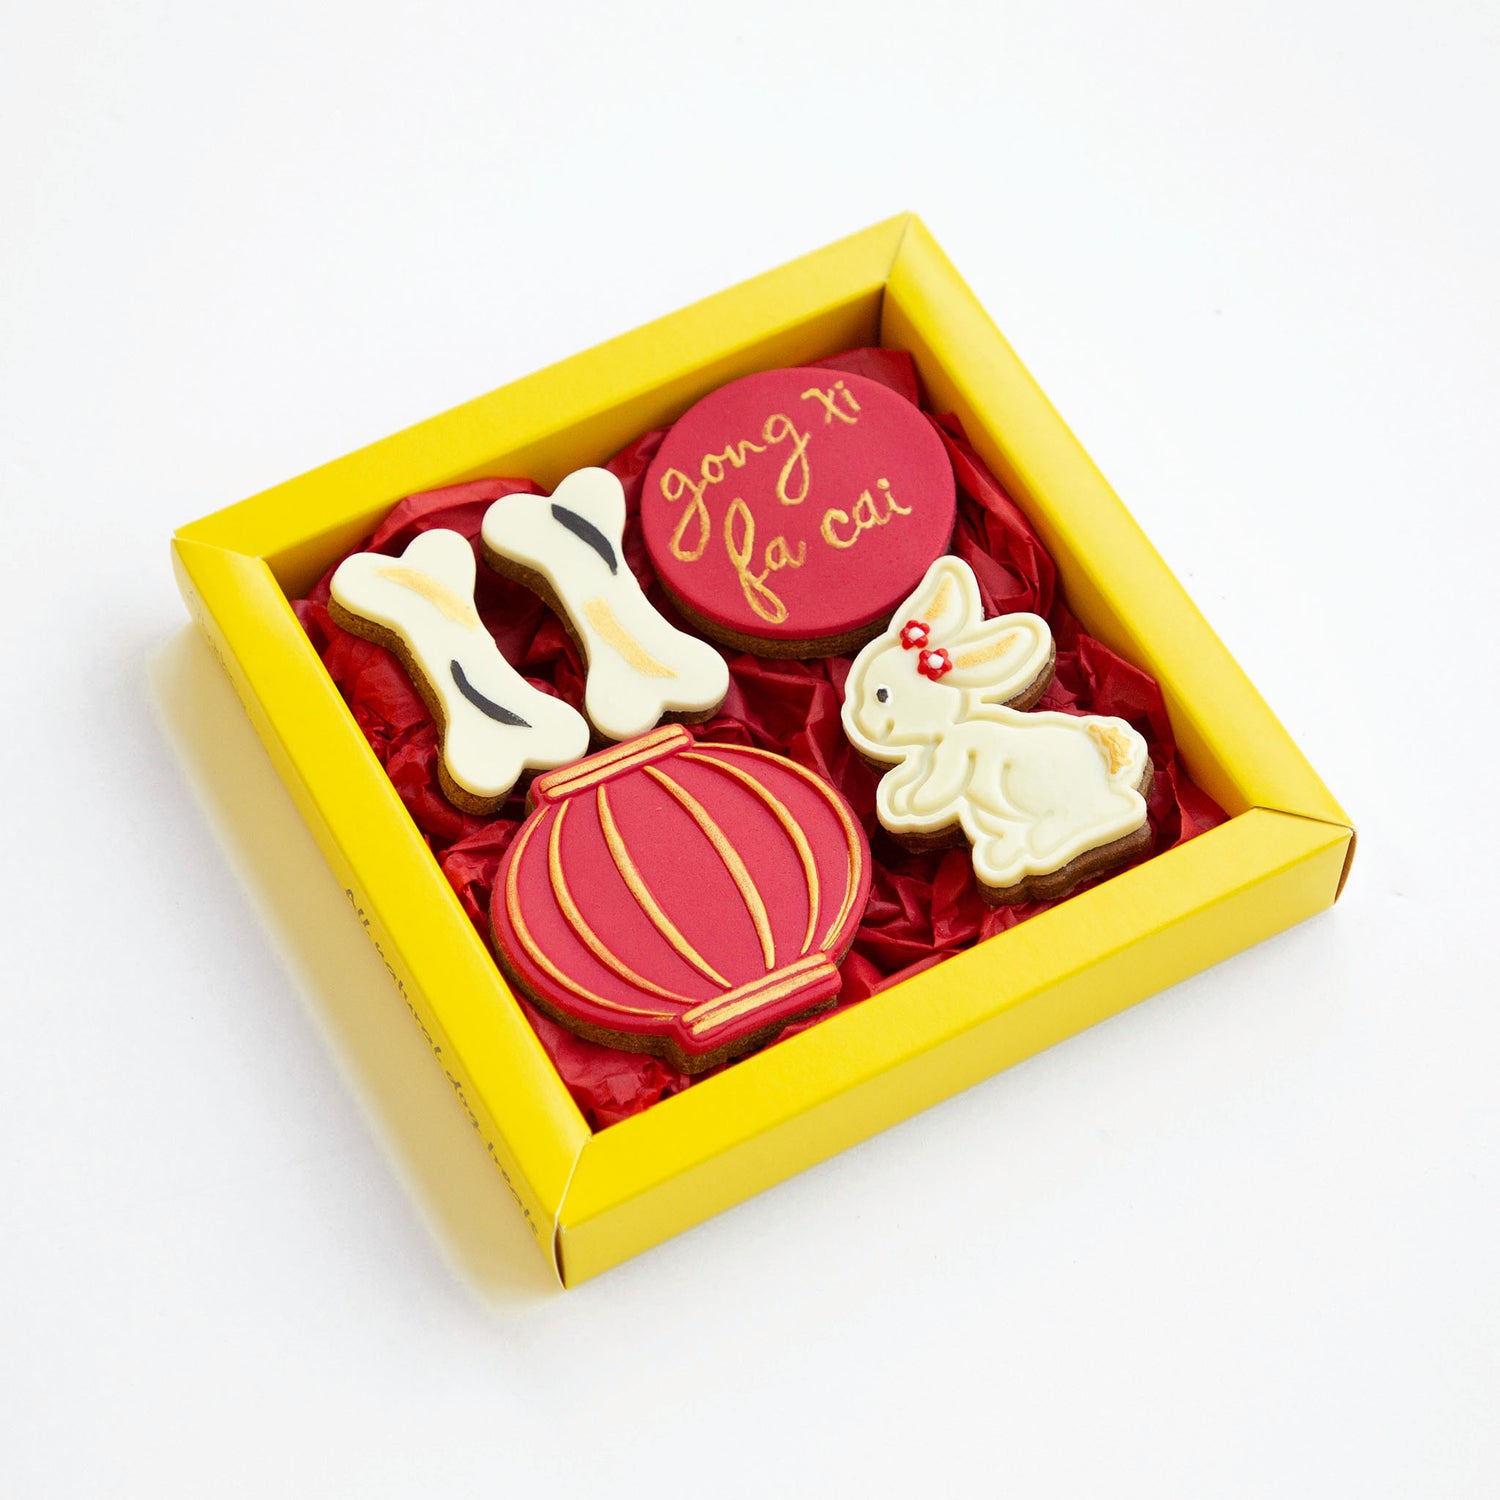 Golden-Barkery-Lunar-Chinese-New-Year-Dog-Treats-Biscuits-openside